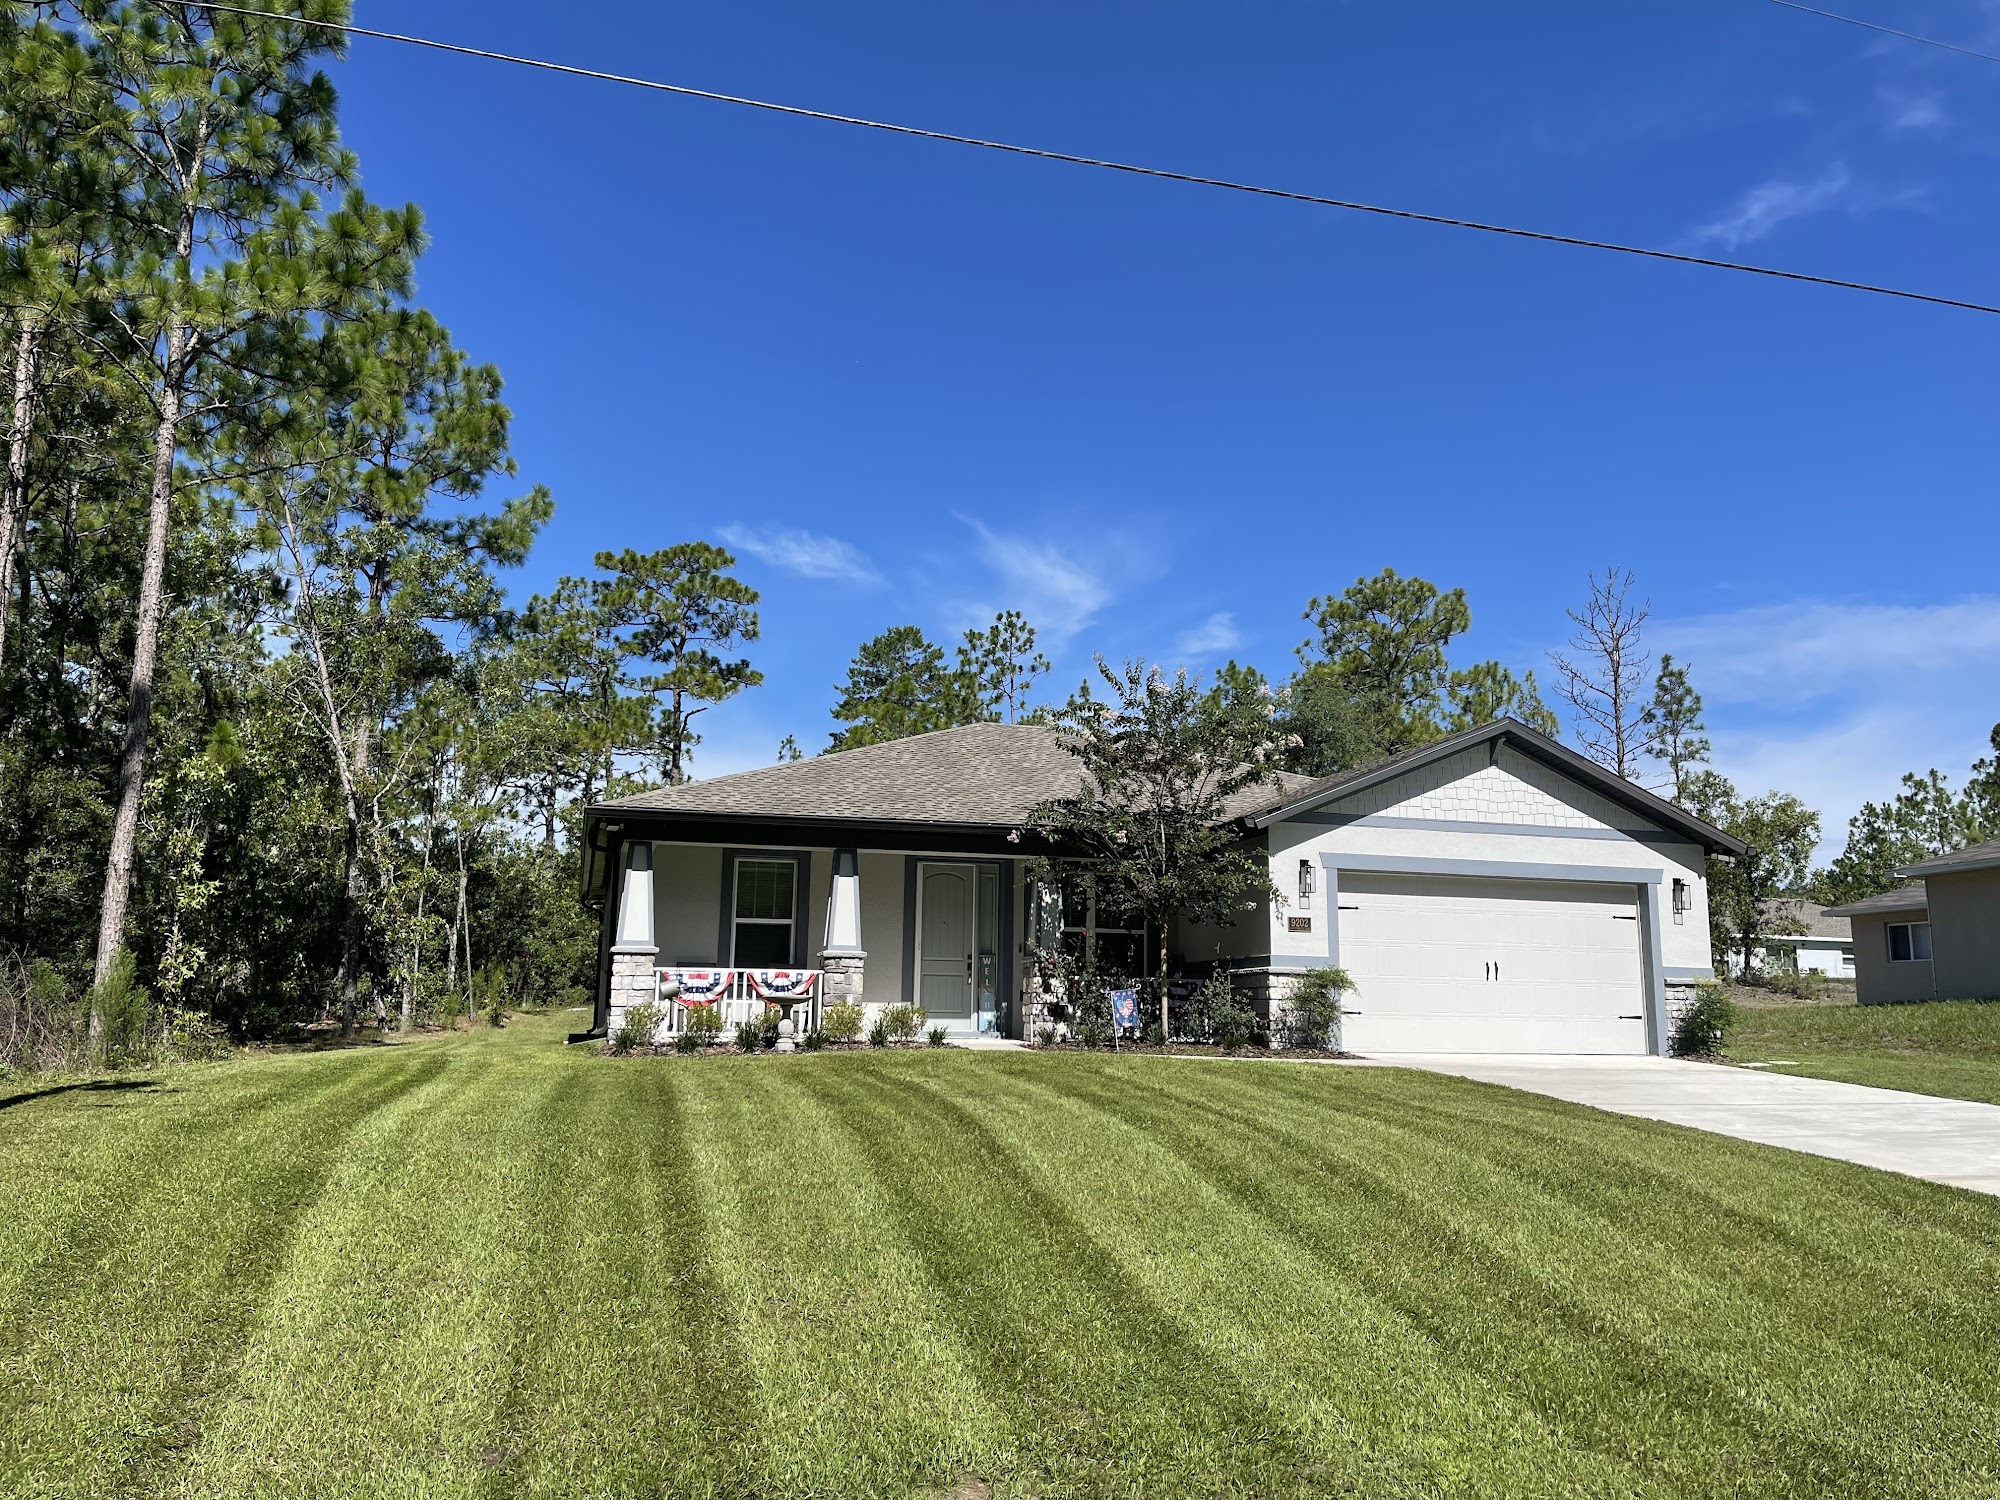 Franklin’s Lawn and Landscaping (Citrus Springs,FL)